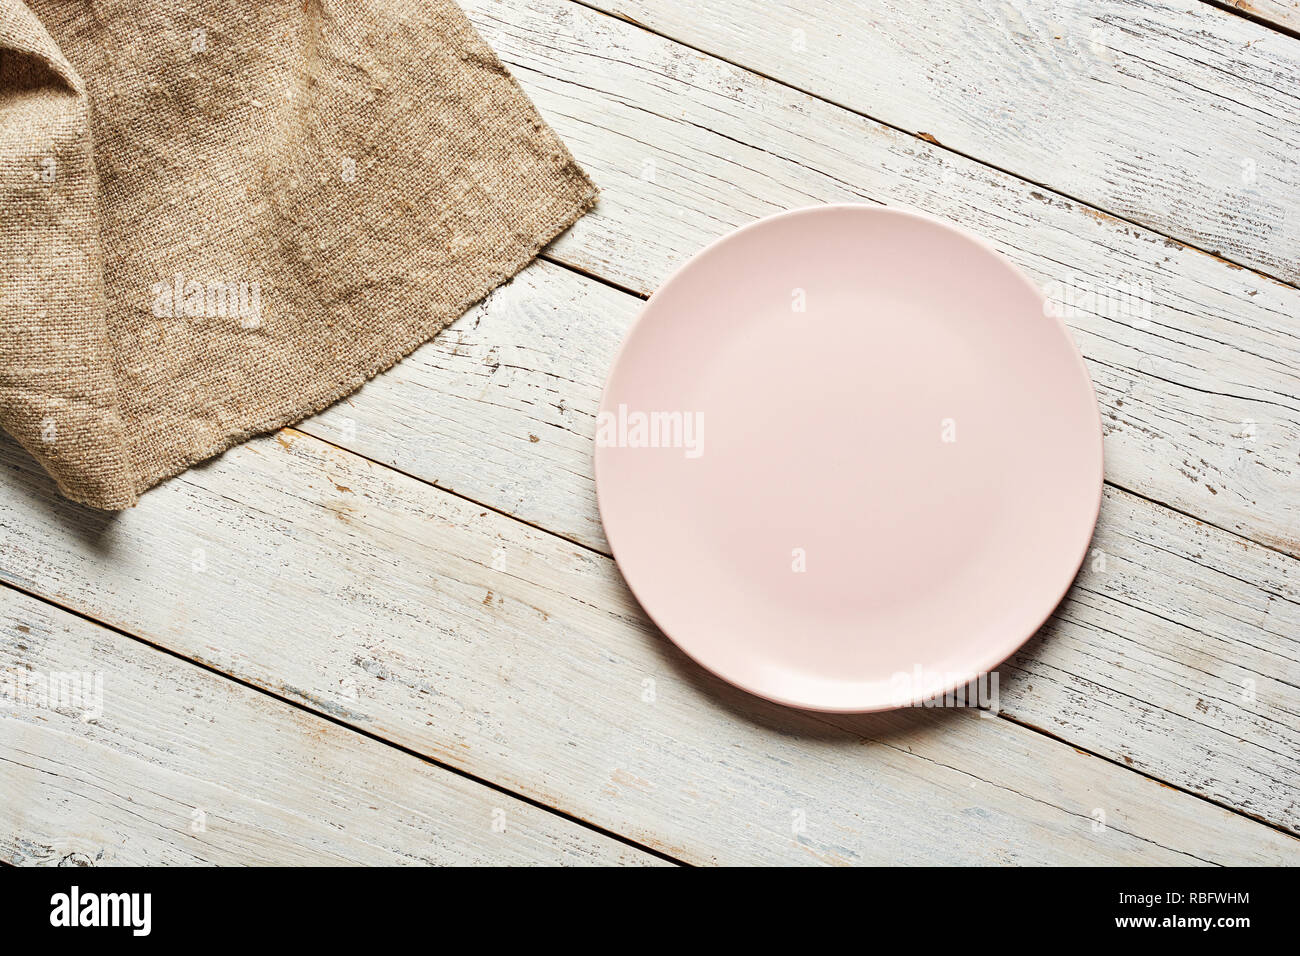 Empty plate and towel over wooden table background. Stock Photo